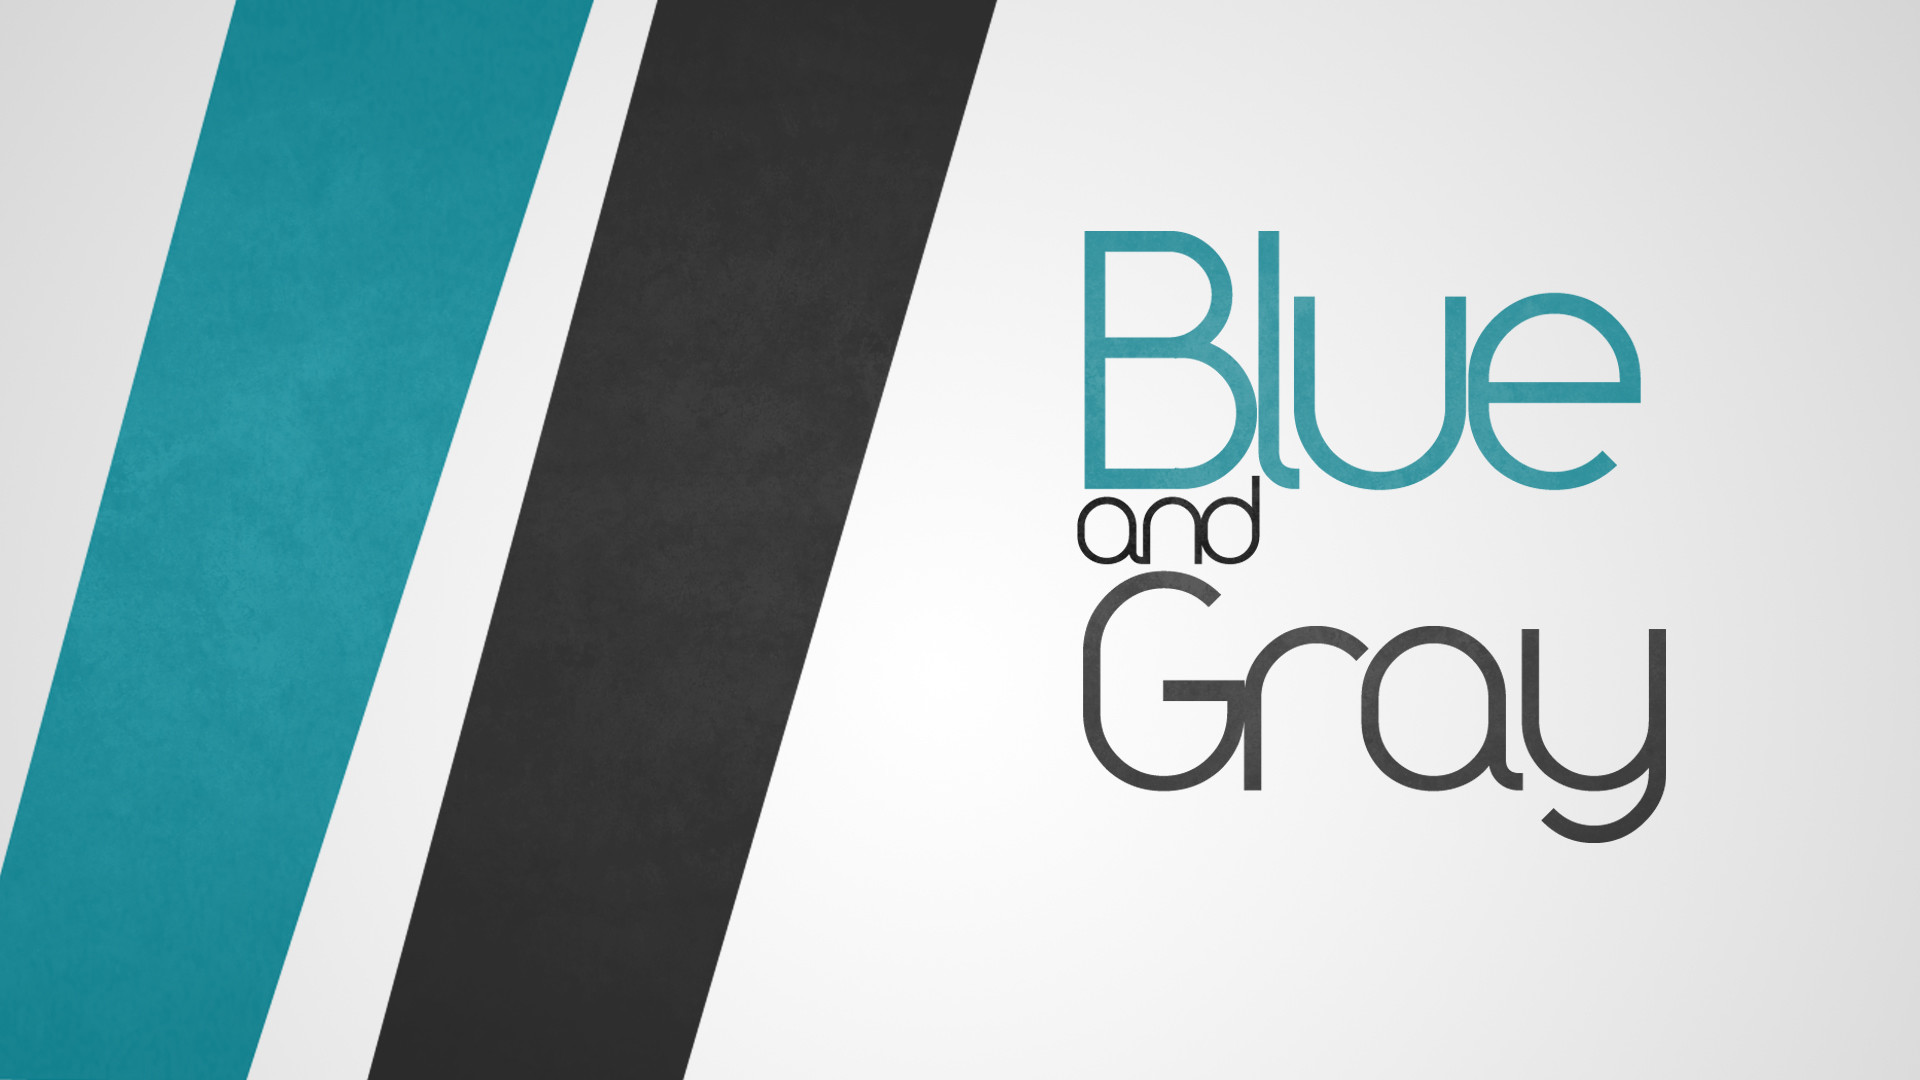 1920x1080 ... Wallpaper - Blue and Gray by AlreadyPwNDGFX